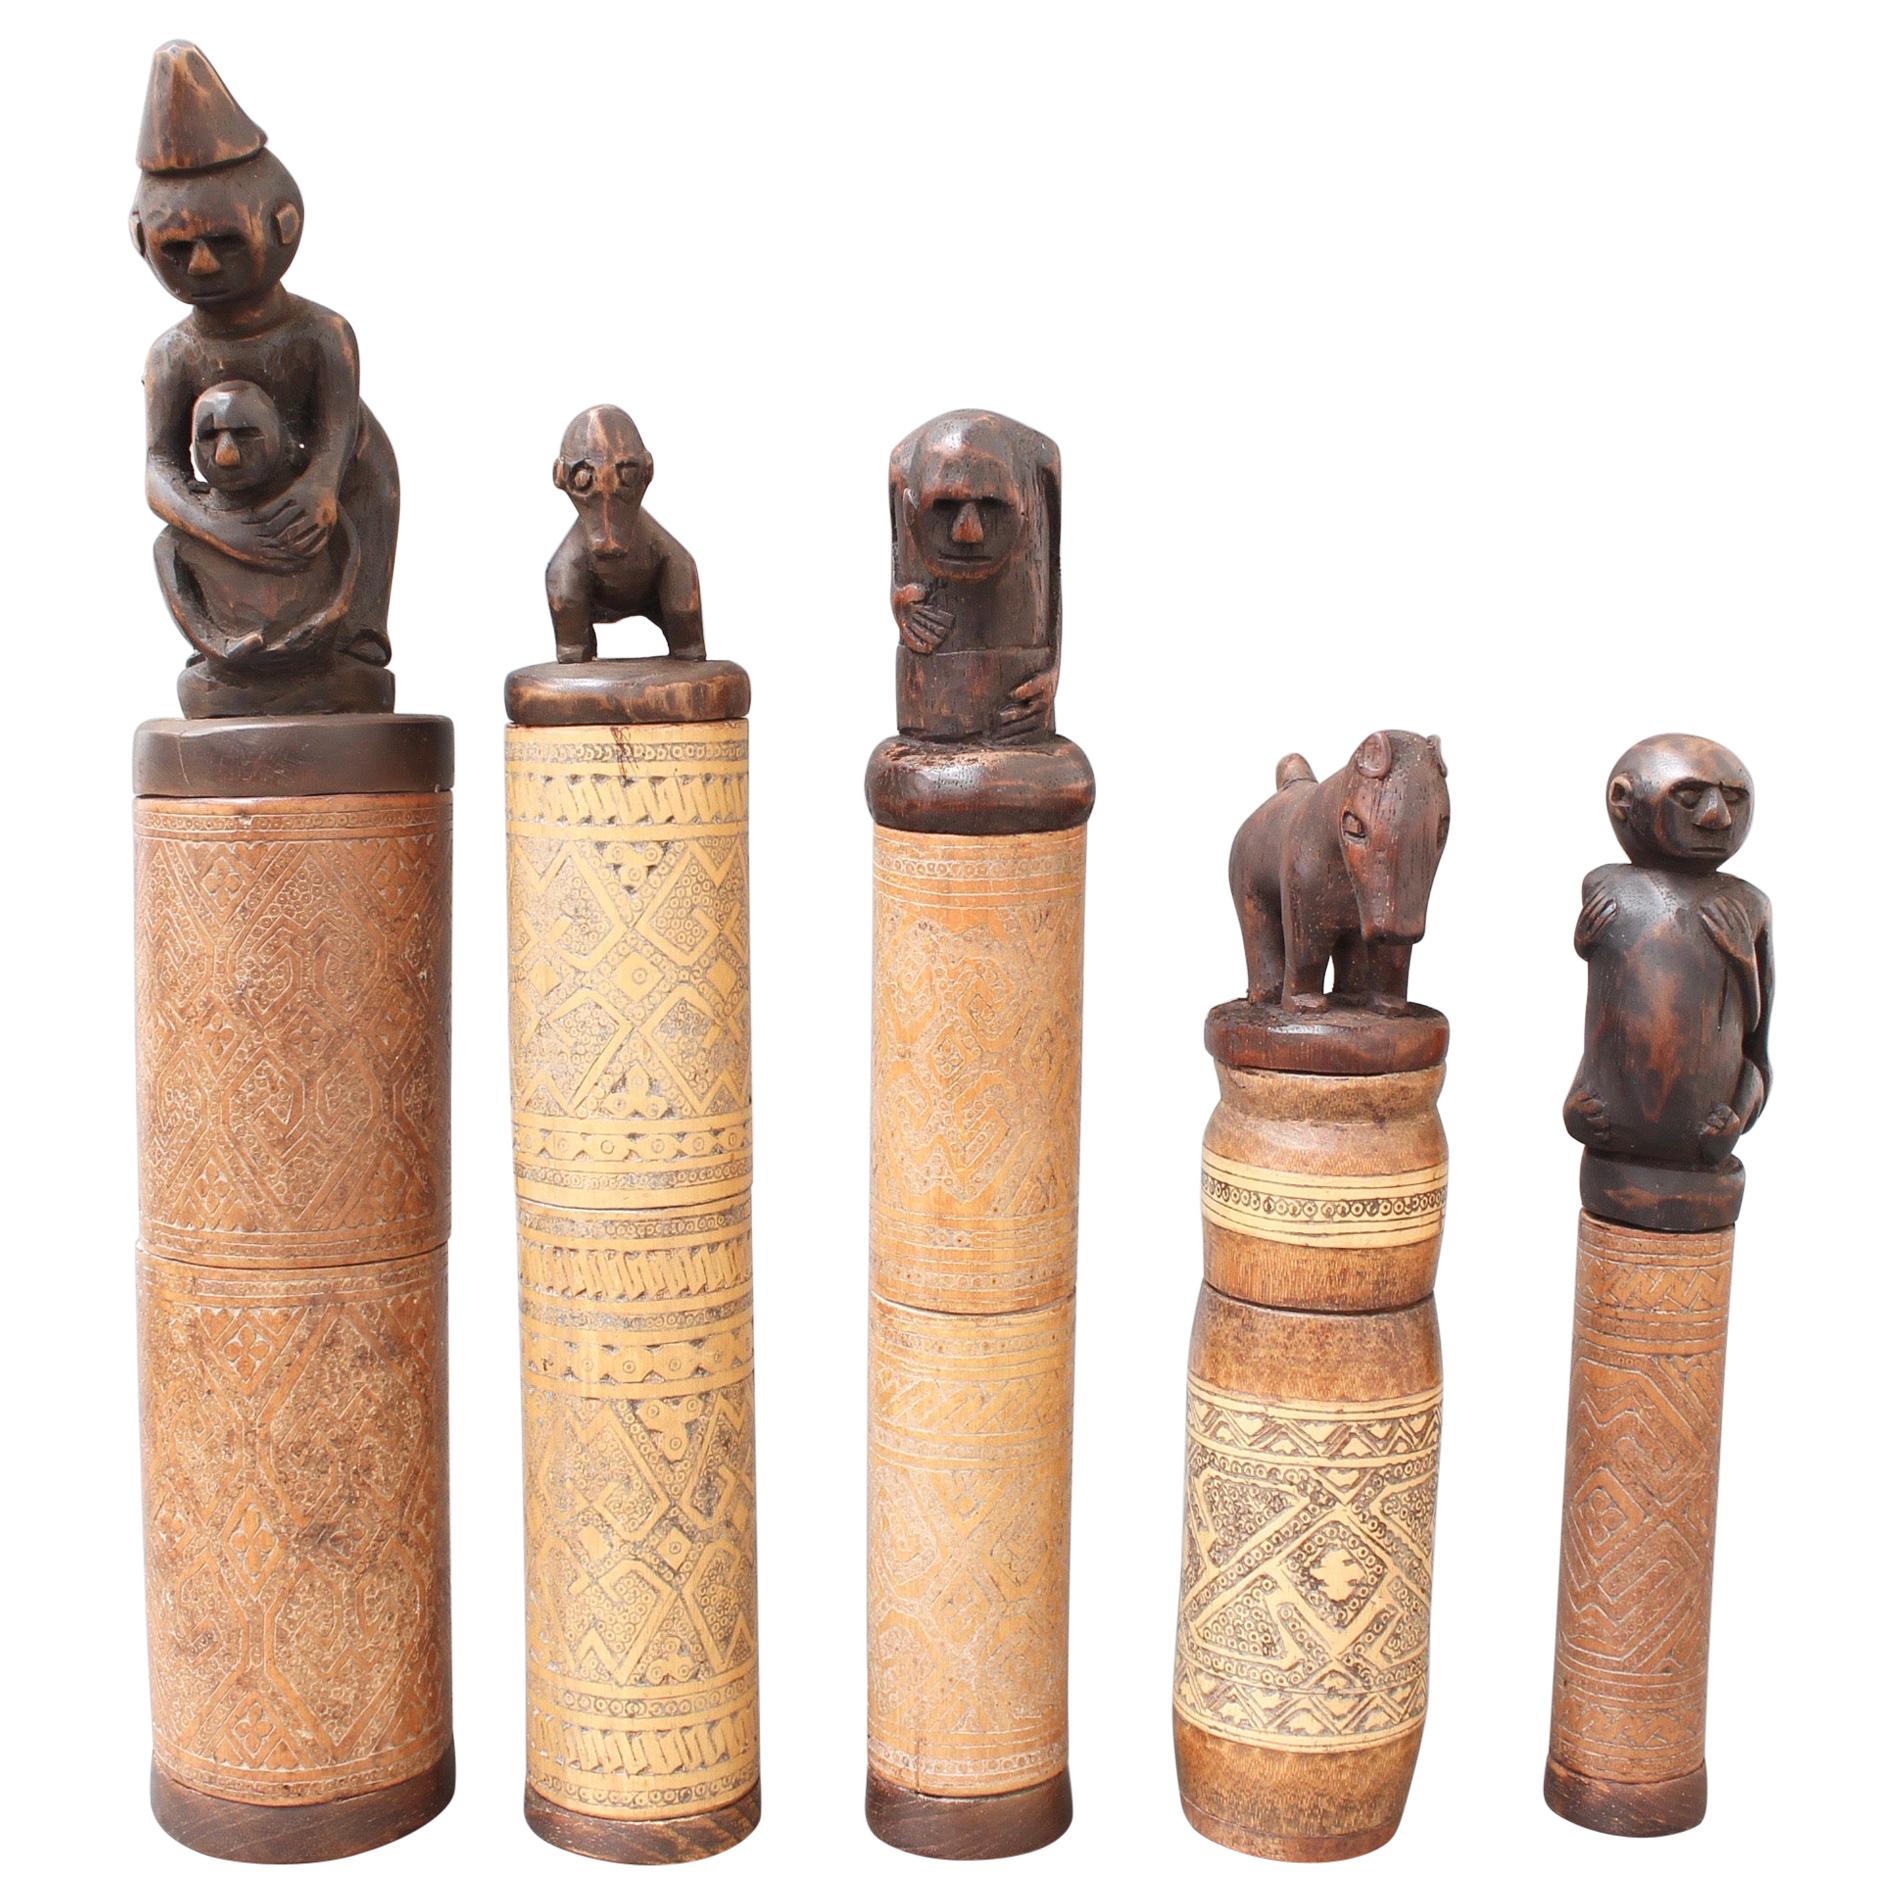 Set of Five Wood and Bamboo Lime Powder Holders for Betel Nut from W. Timor